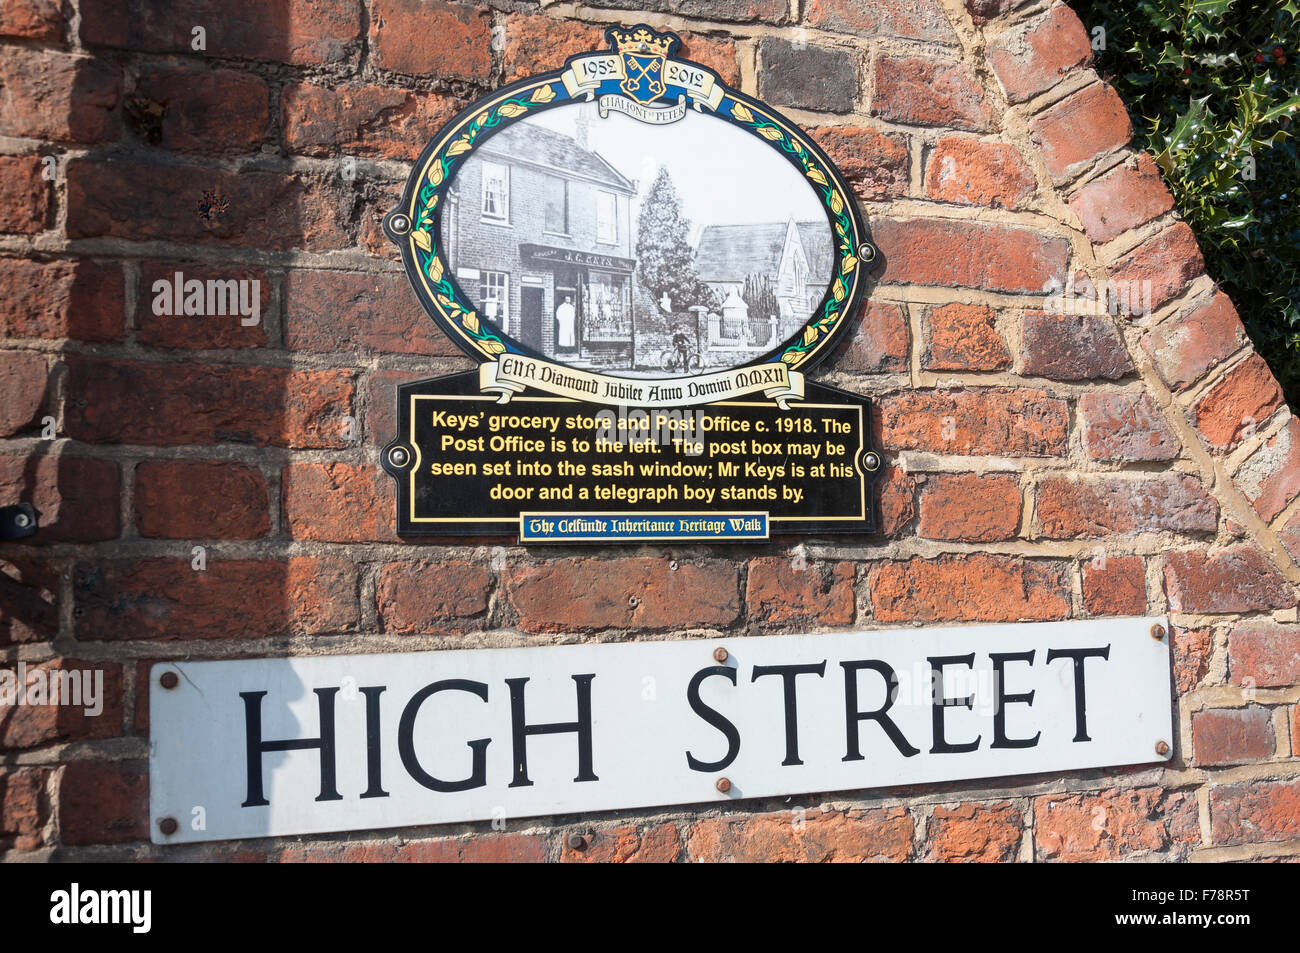 Village heritage and High Street signs, High Street, Chalfont St Peter, Buckinghamshire, England, United Kingdom Stock Photo